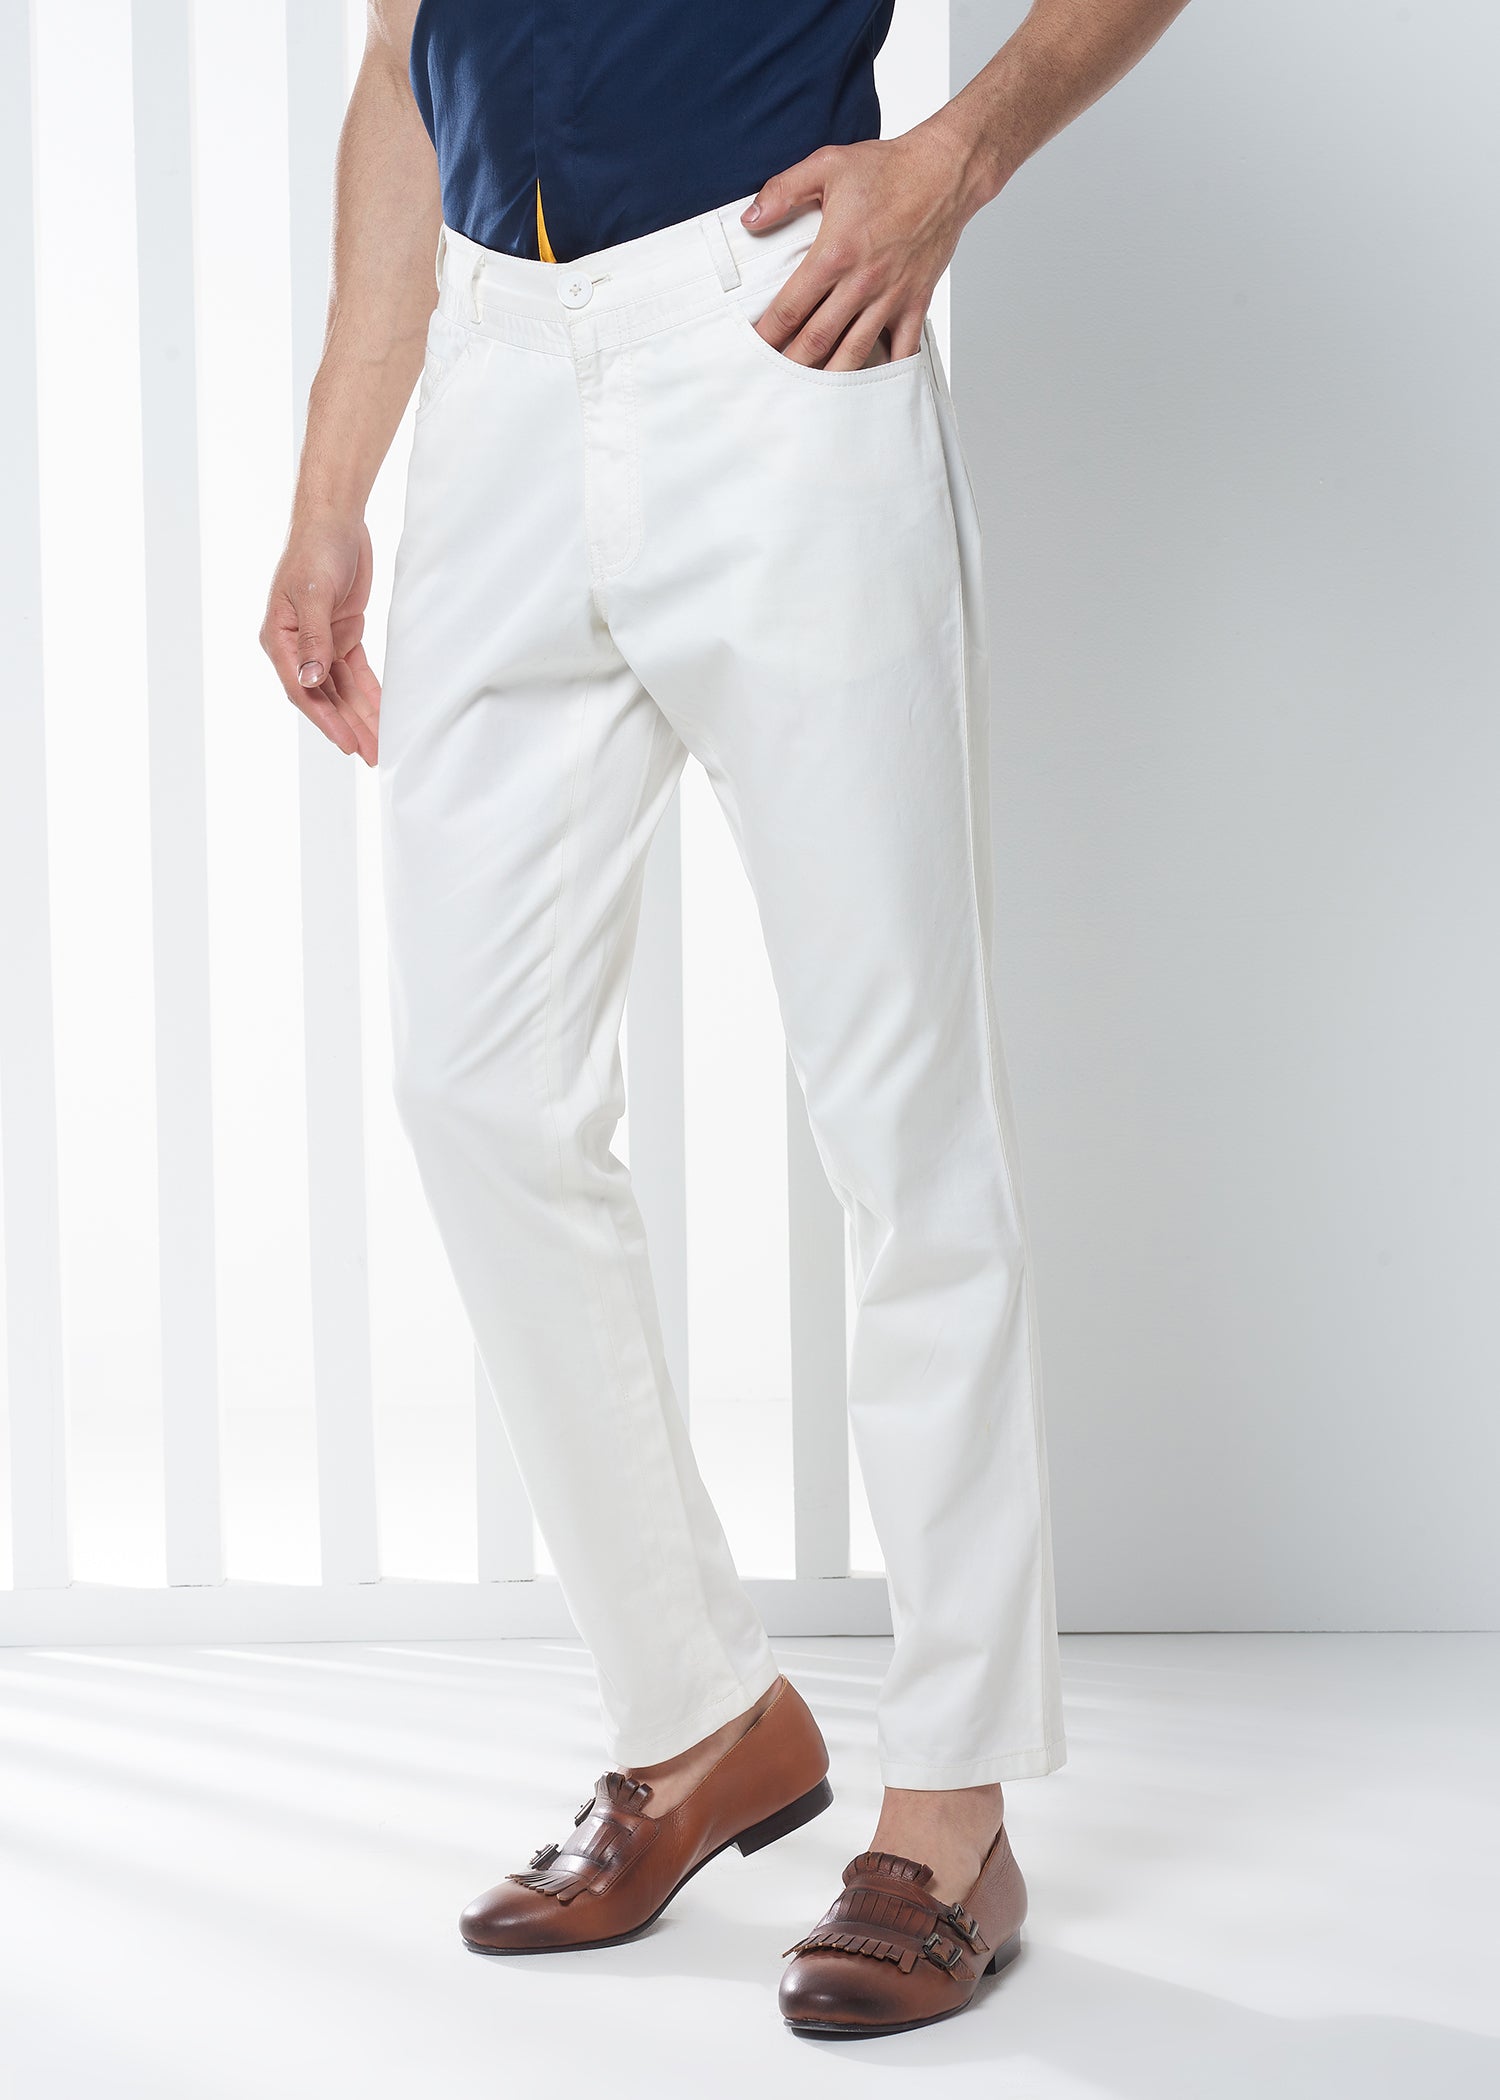 Classic Ivory Cotton Trouser